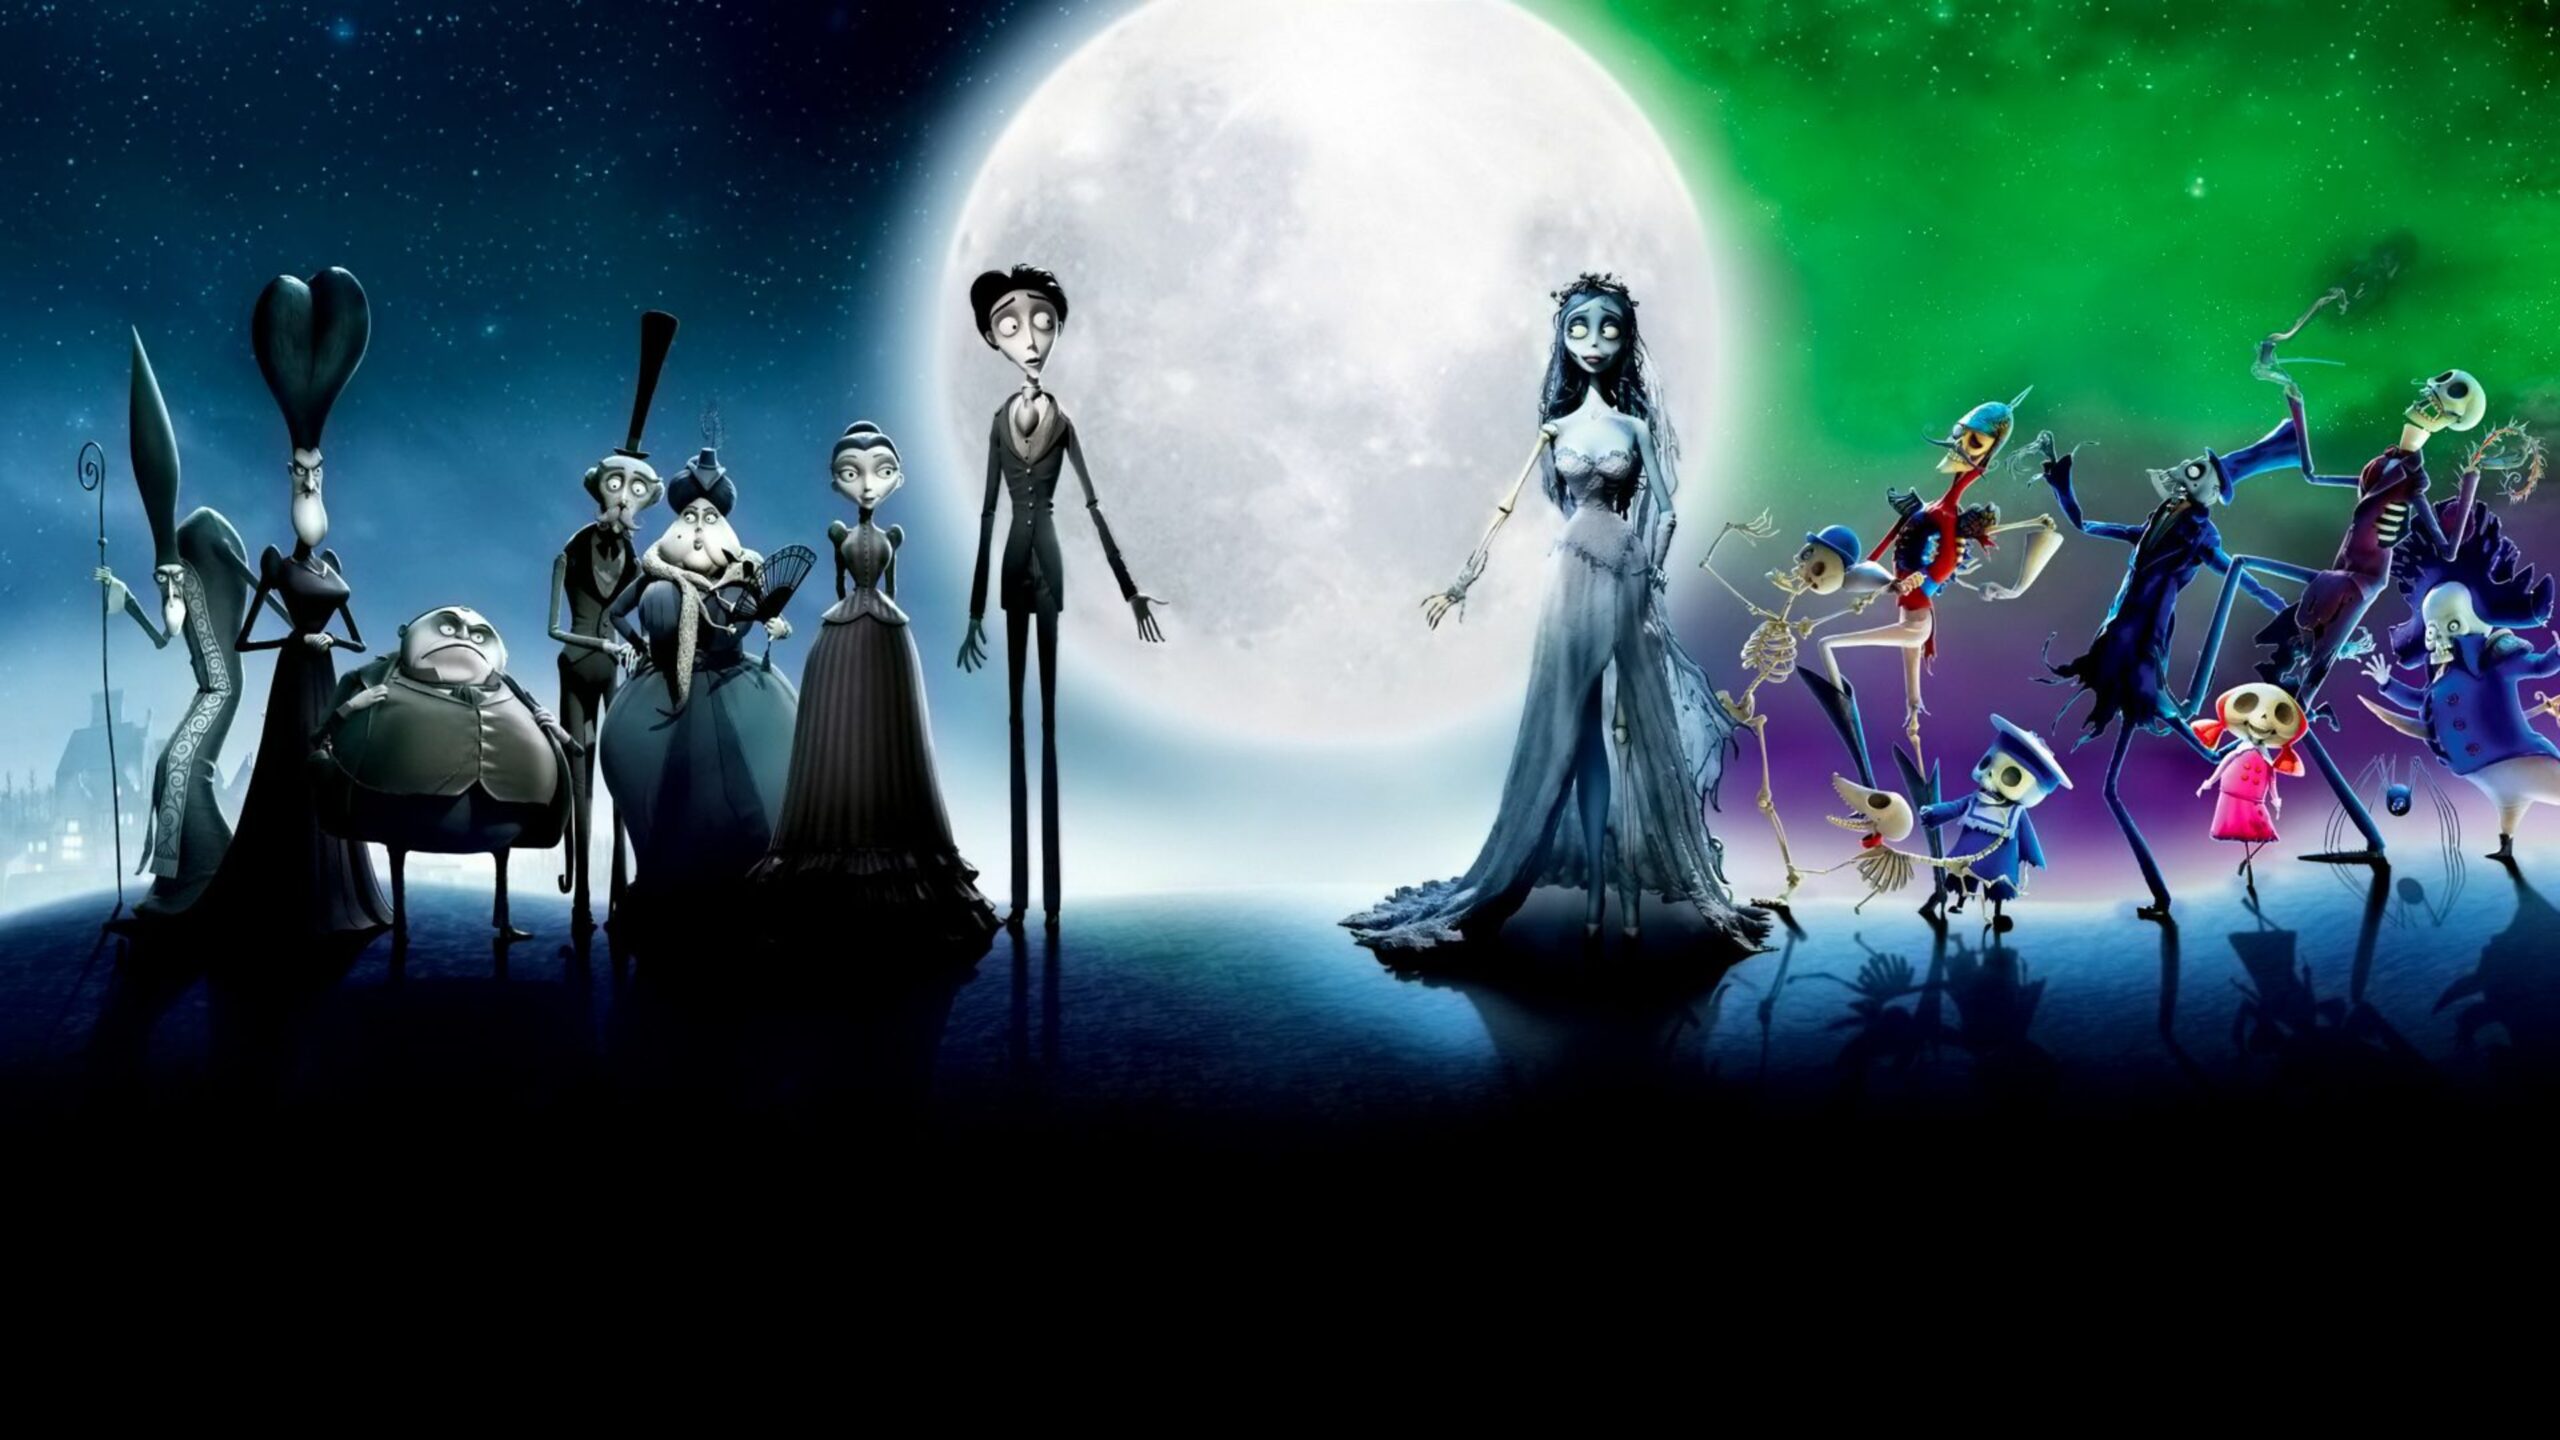 Corpse Bride Background Images